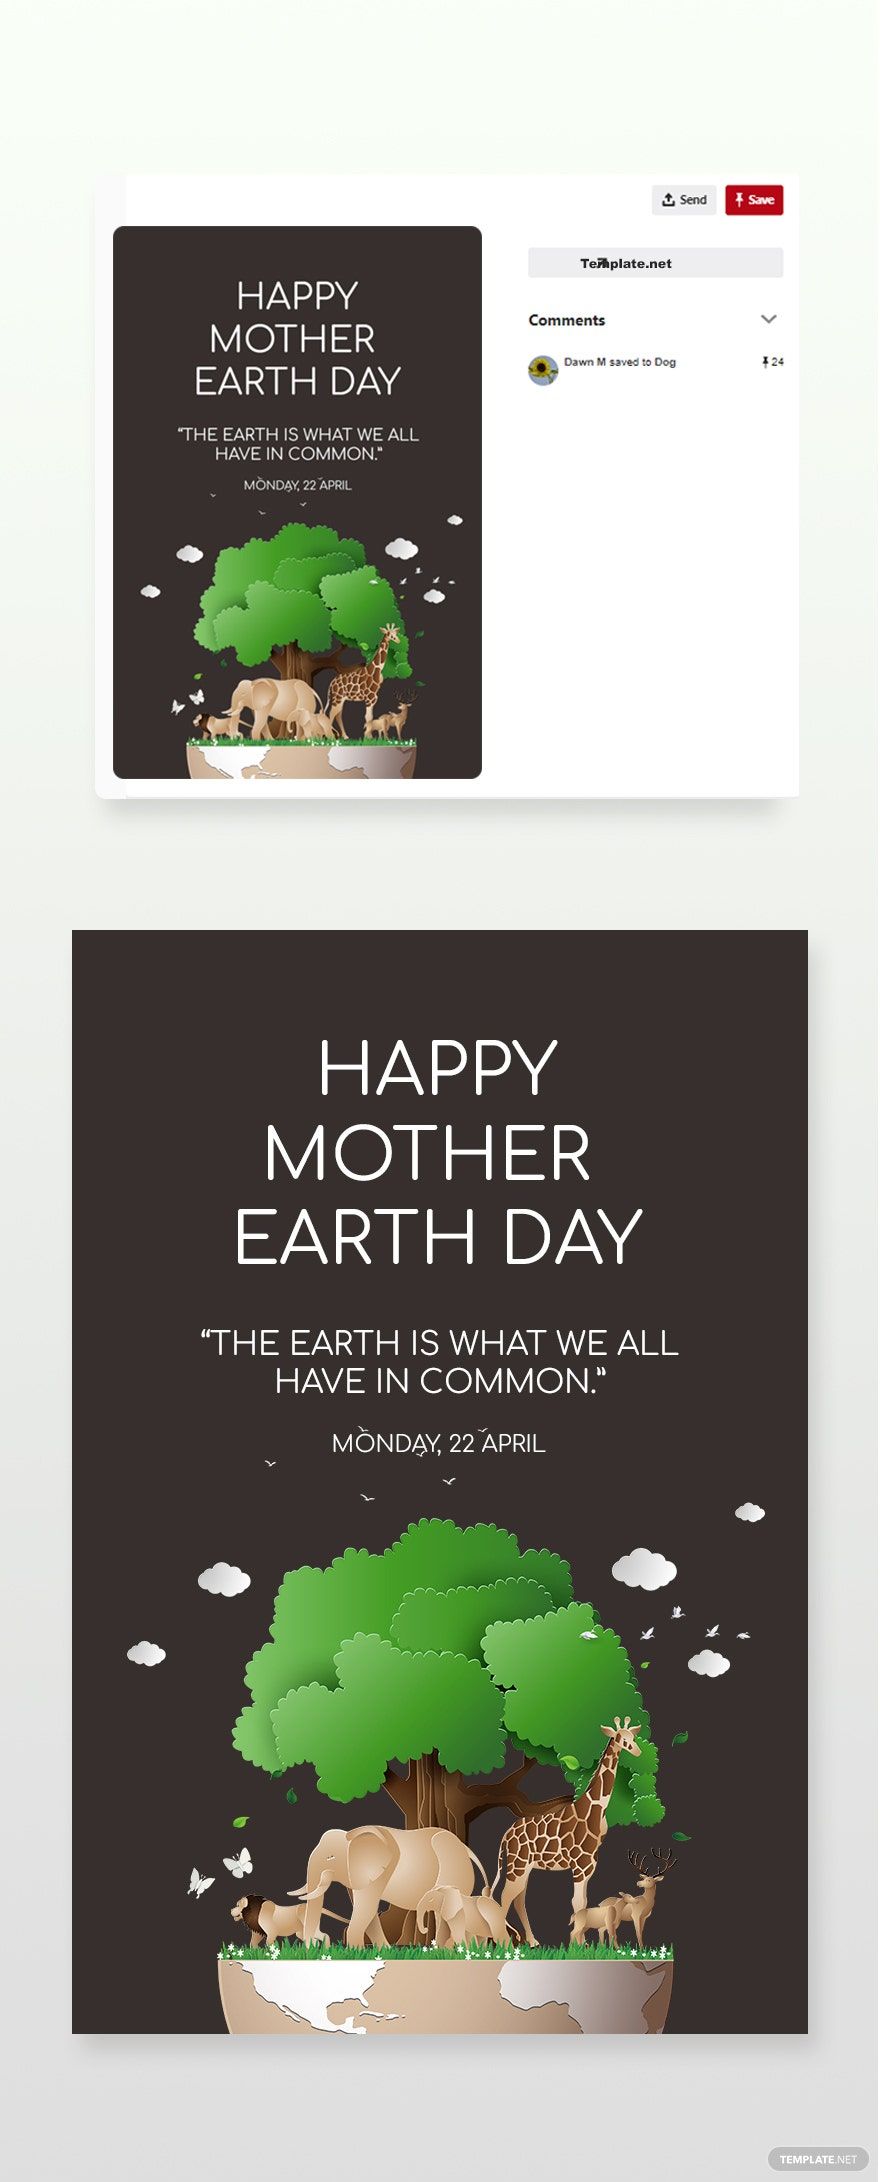 Free Pinterest Earth Day Template in PSD